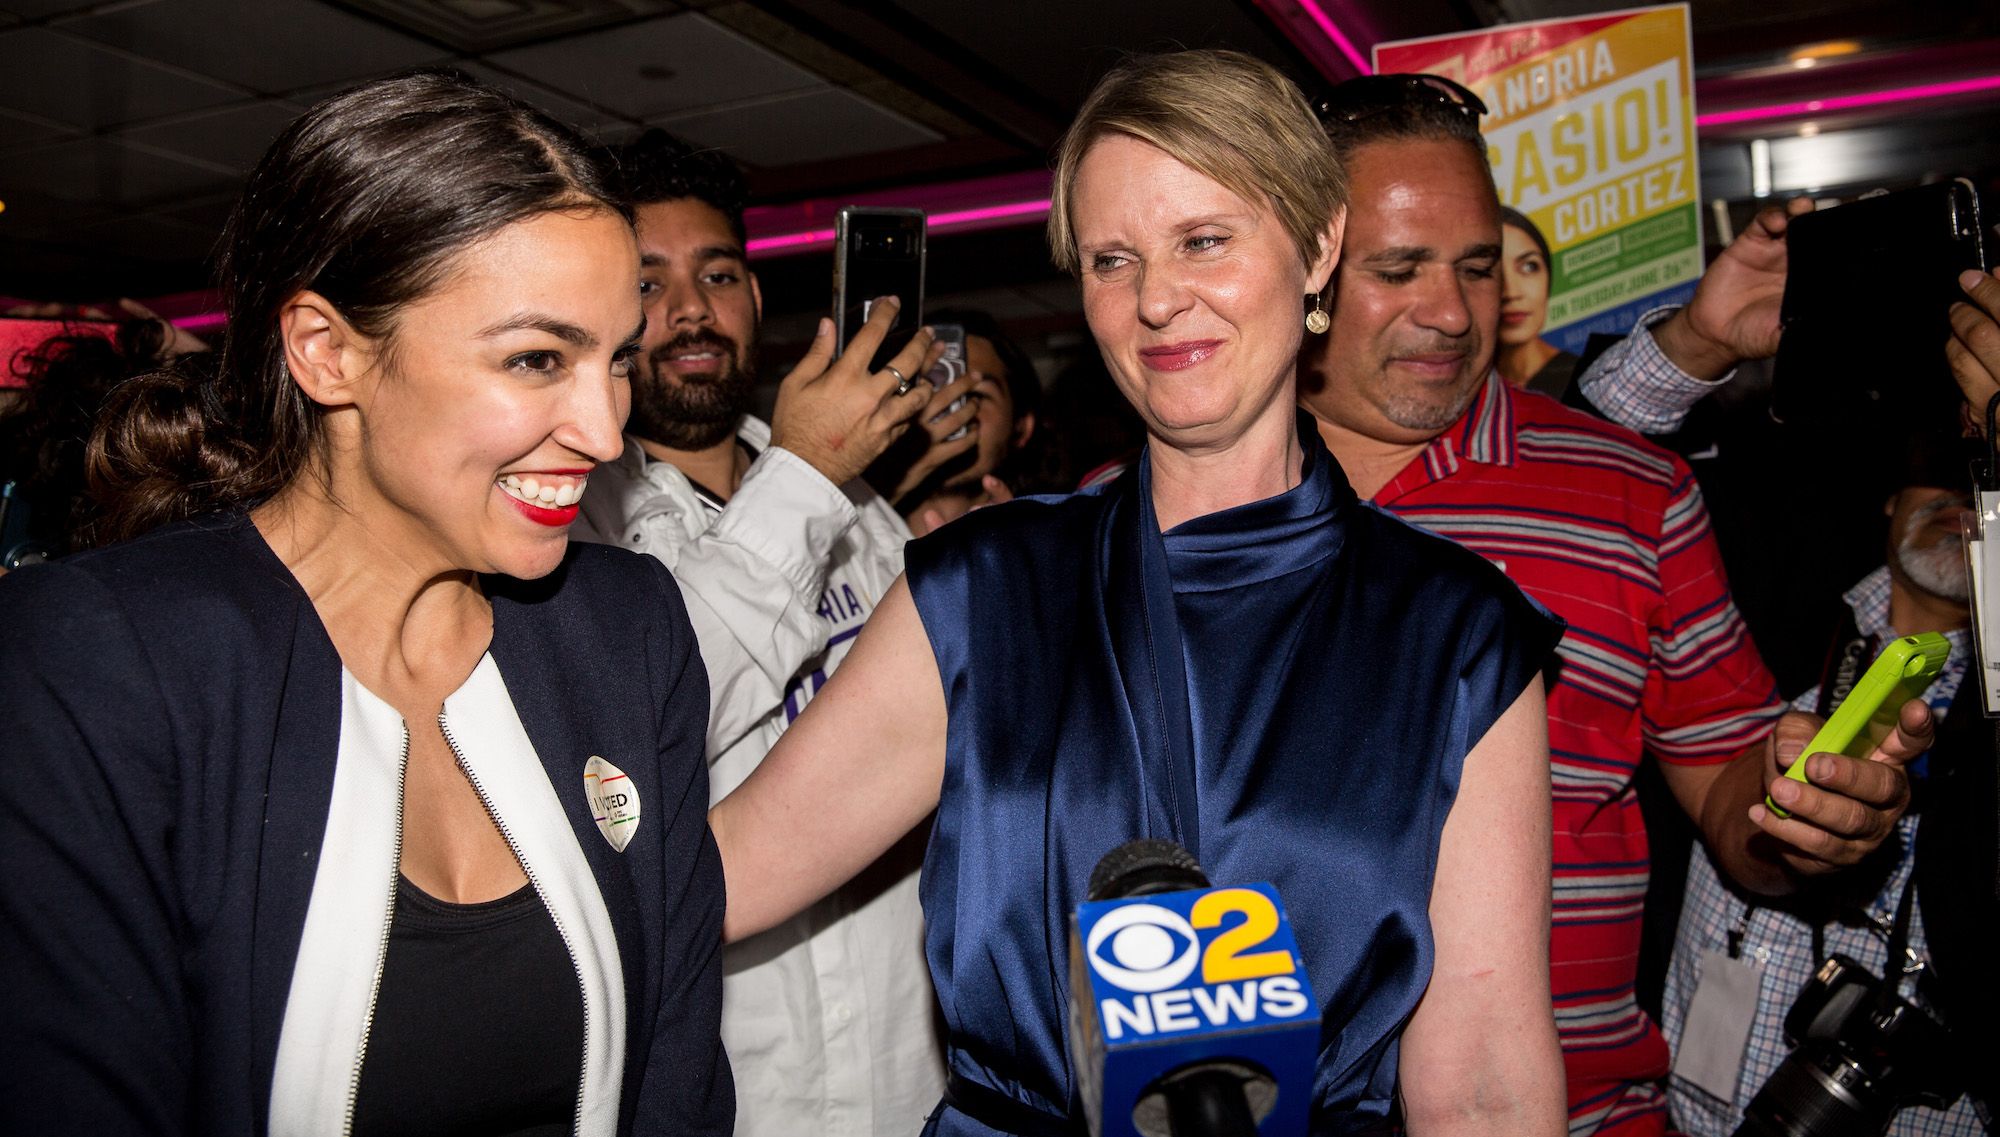 Ocasio-Cortez faces 13 challengers – but can anyone unseat her